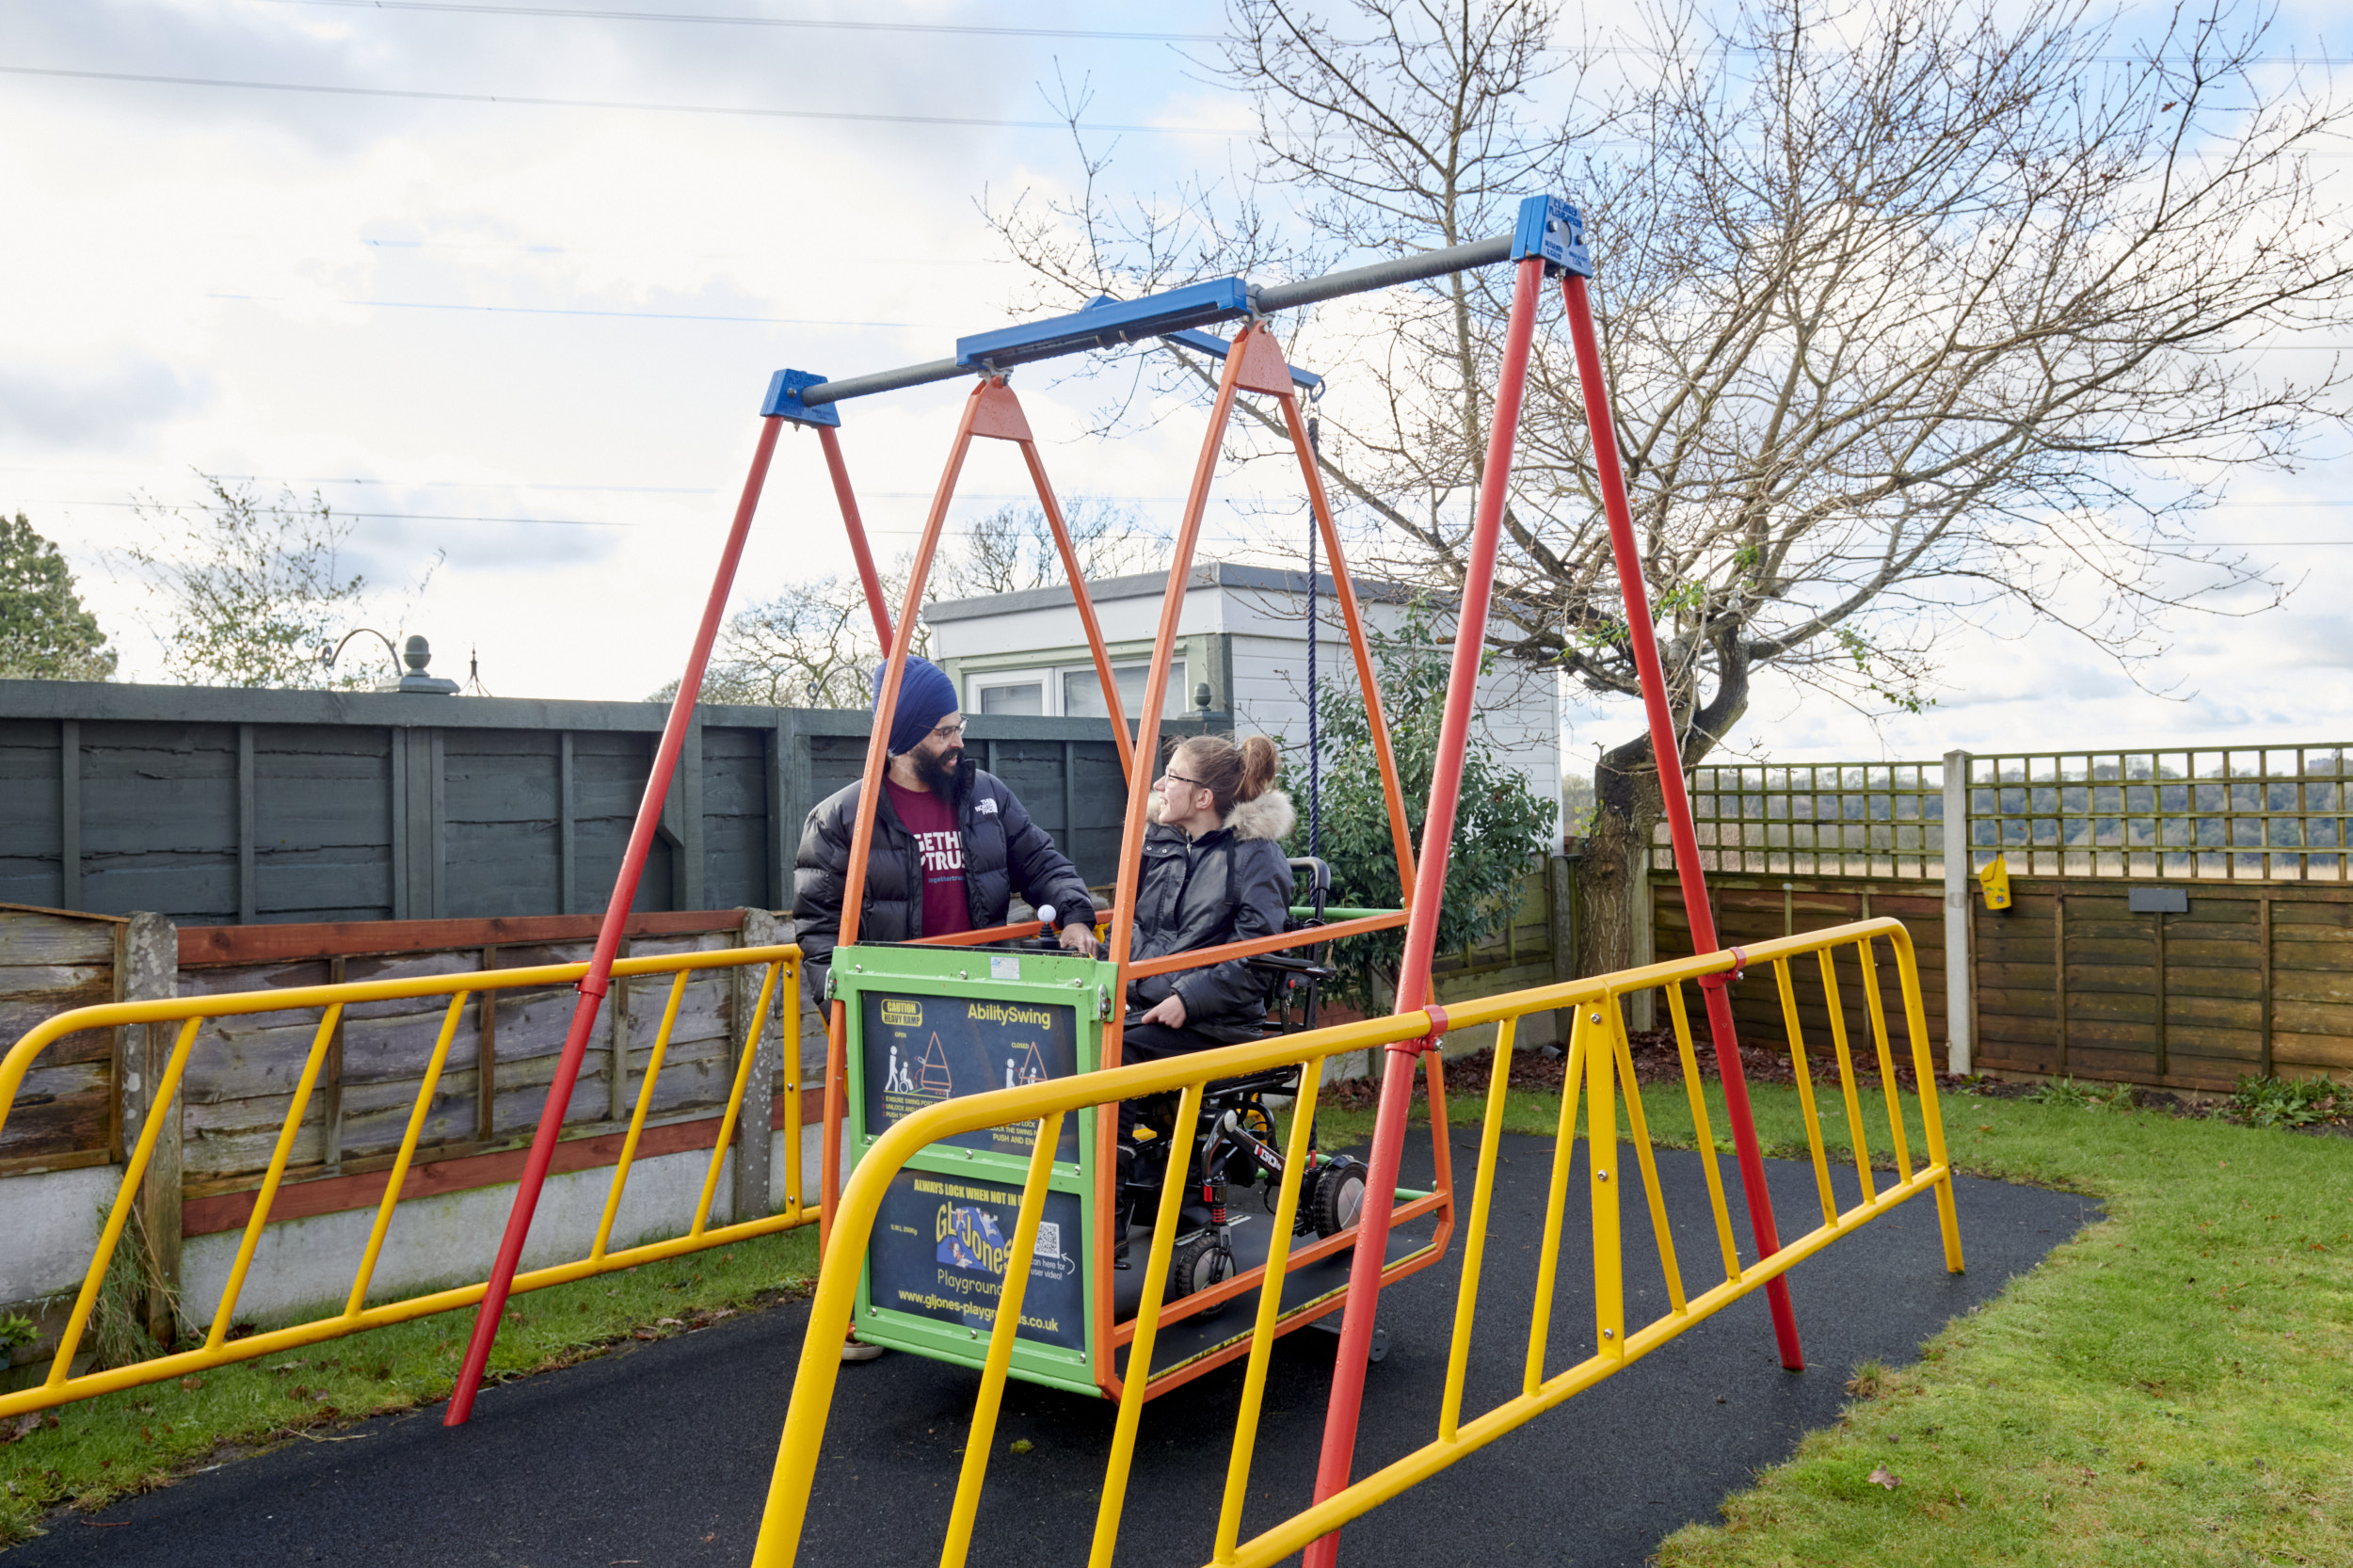 A young girl in a wheelchair on an accessible swing, being helped by her support worker.